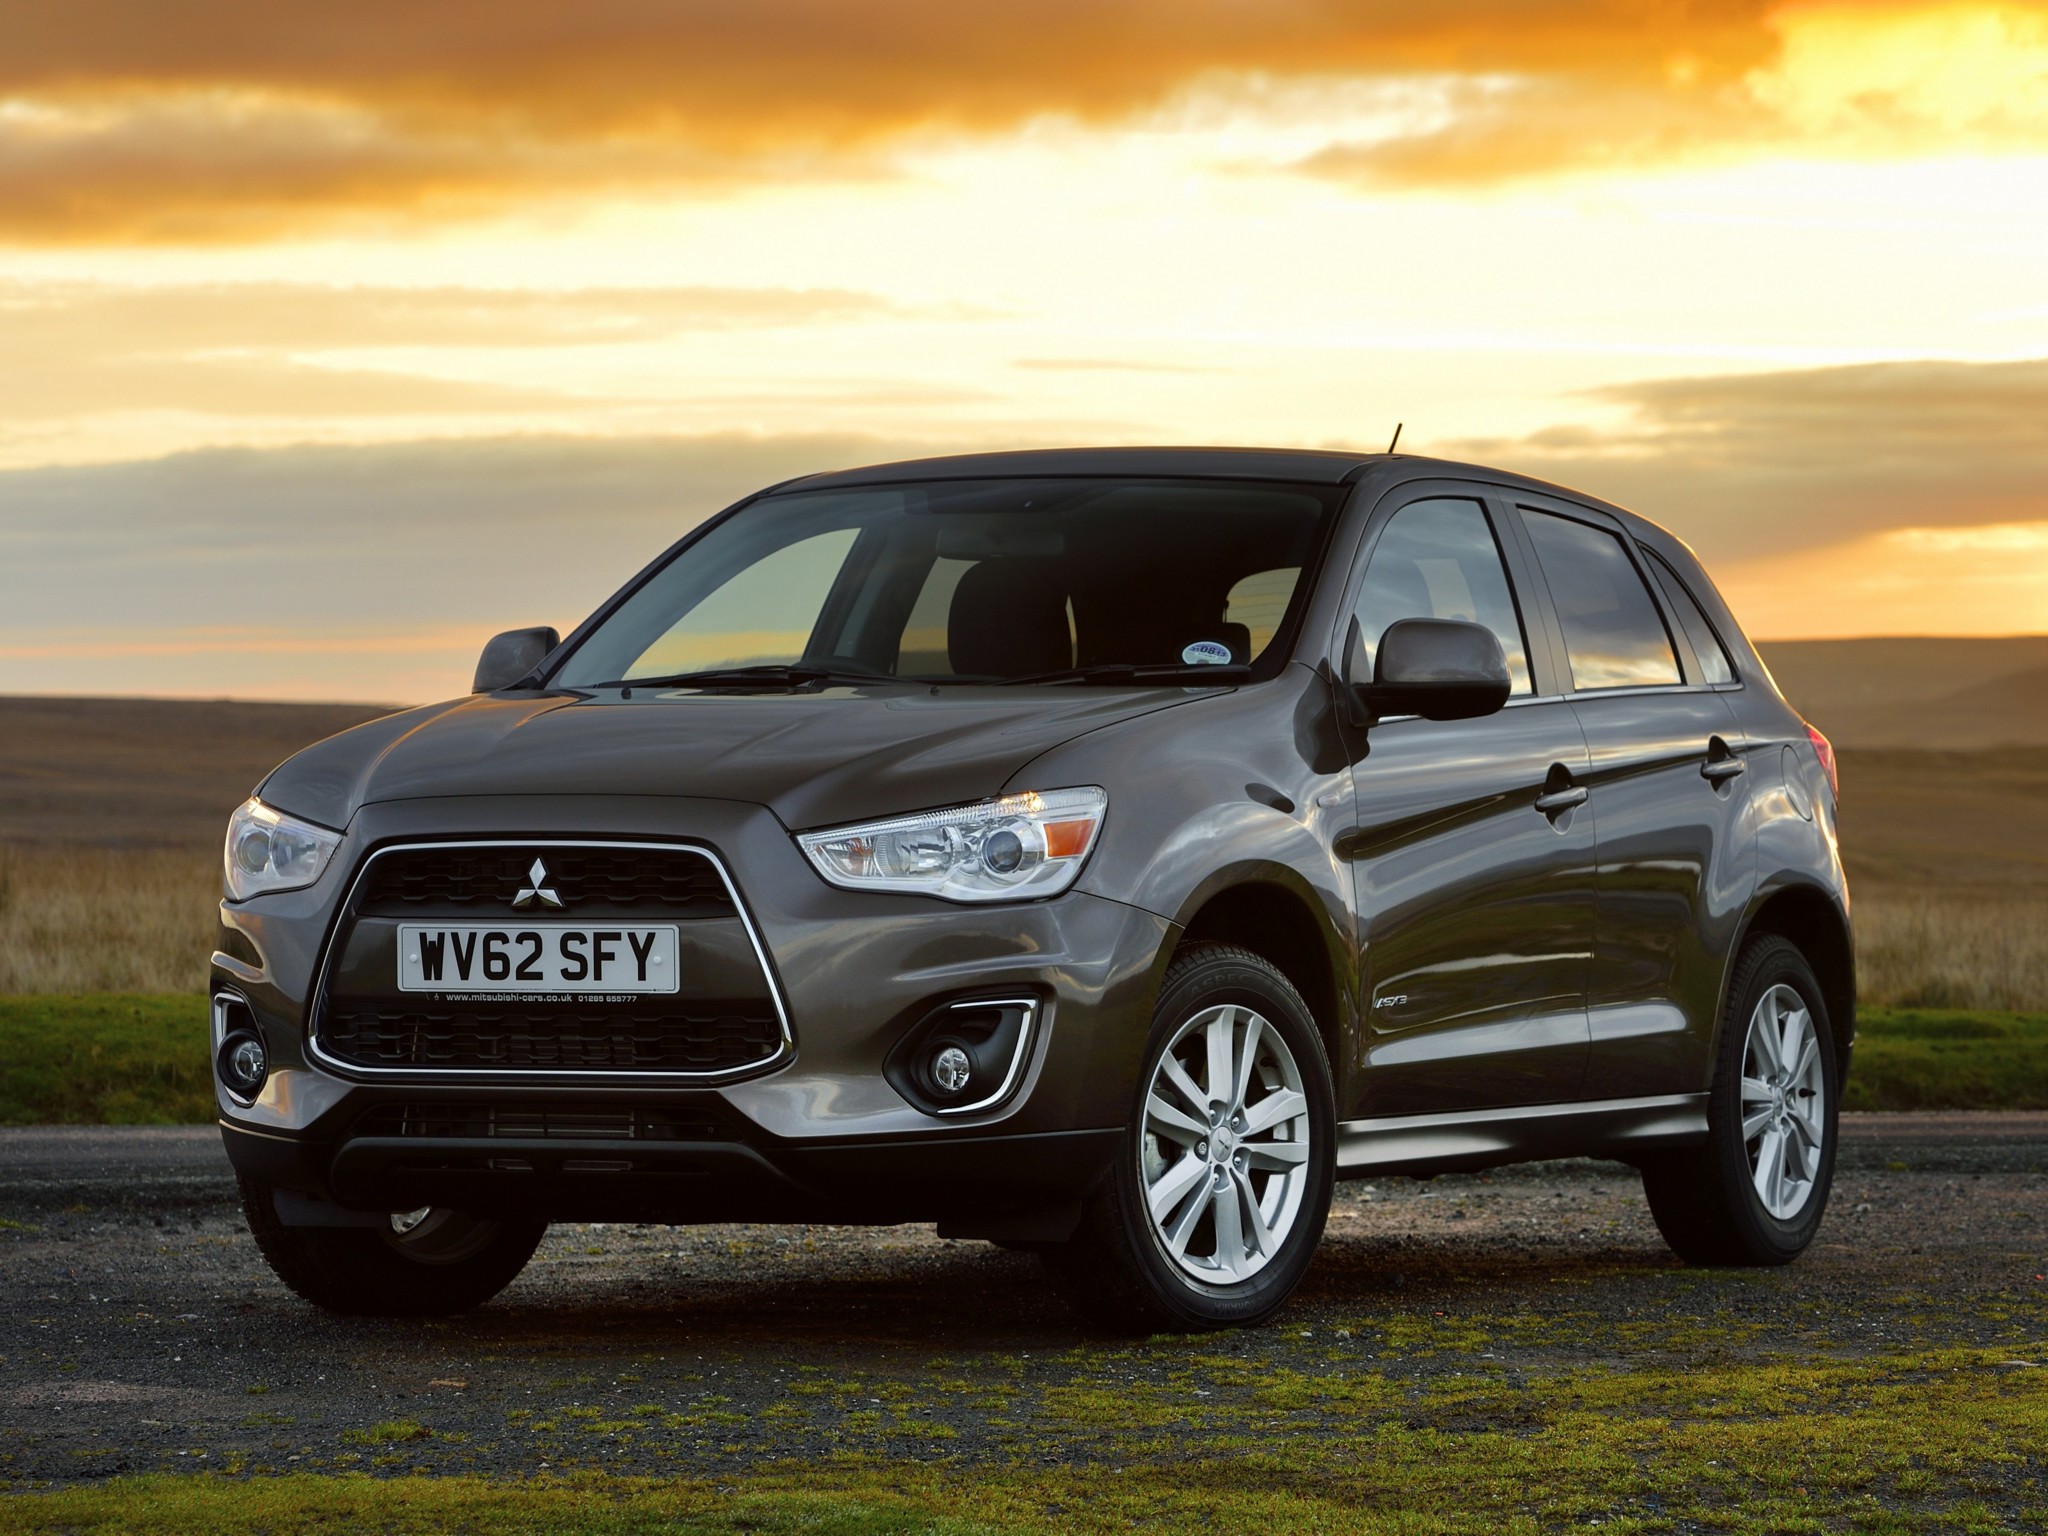 Photo of a car Mitsubishi ASX wallpapers and images